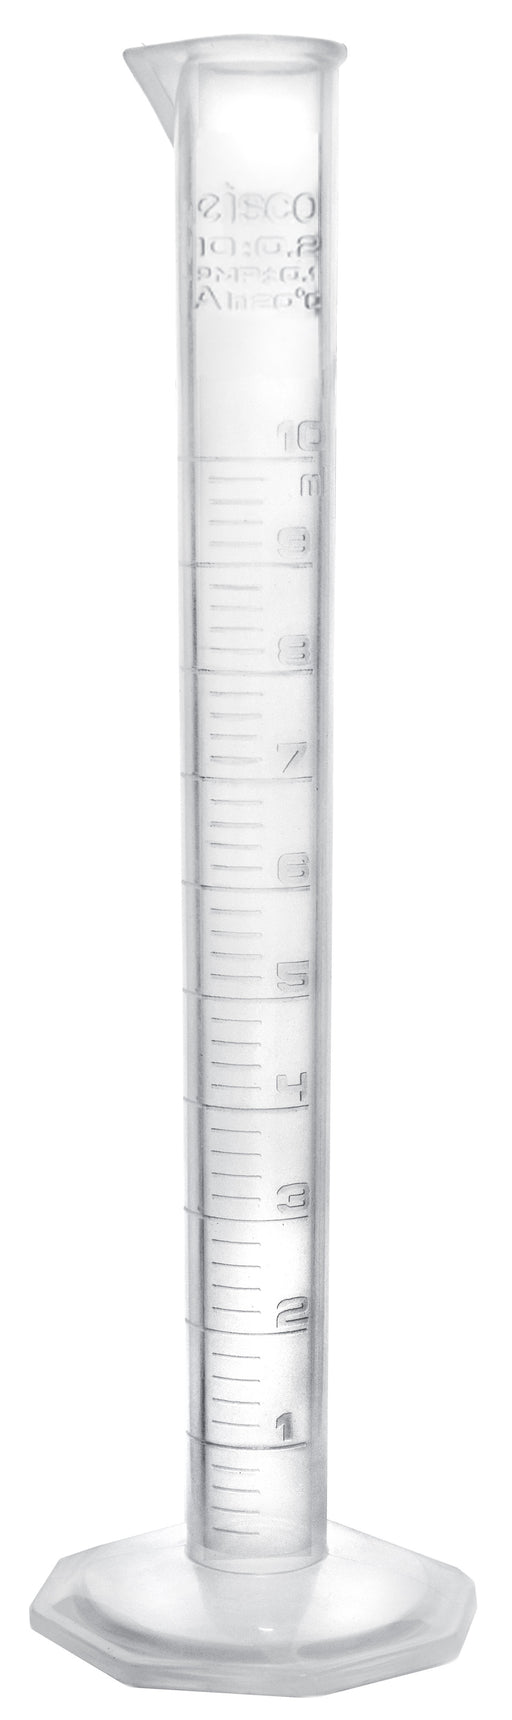 Measuring Cylinder, 100ml - Class A - TPX — Eisco Labs